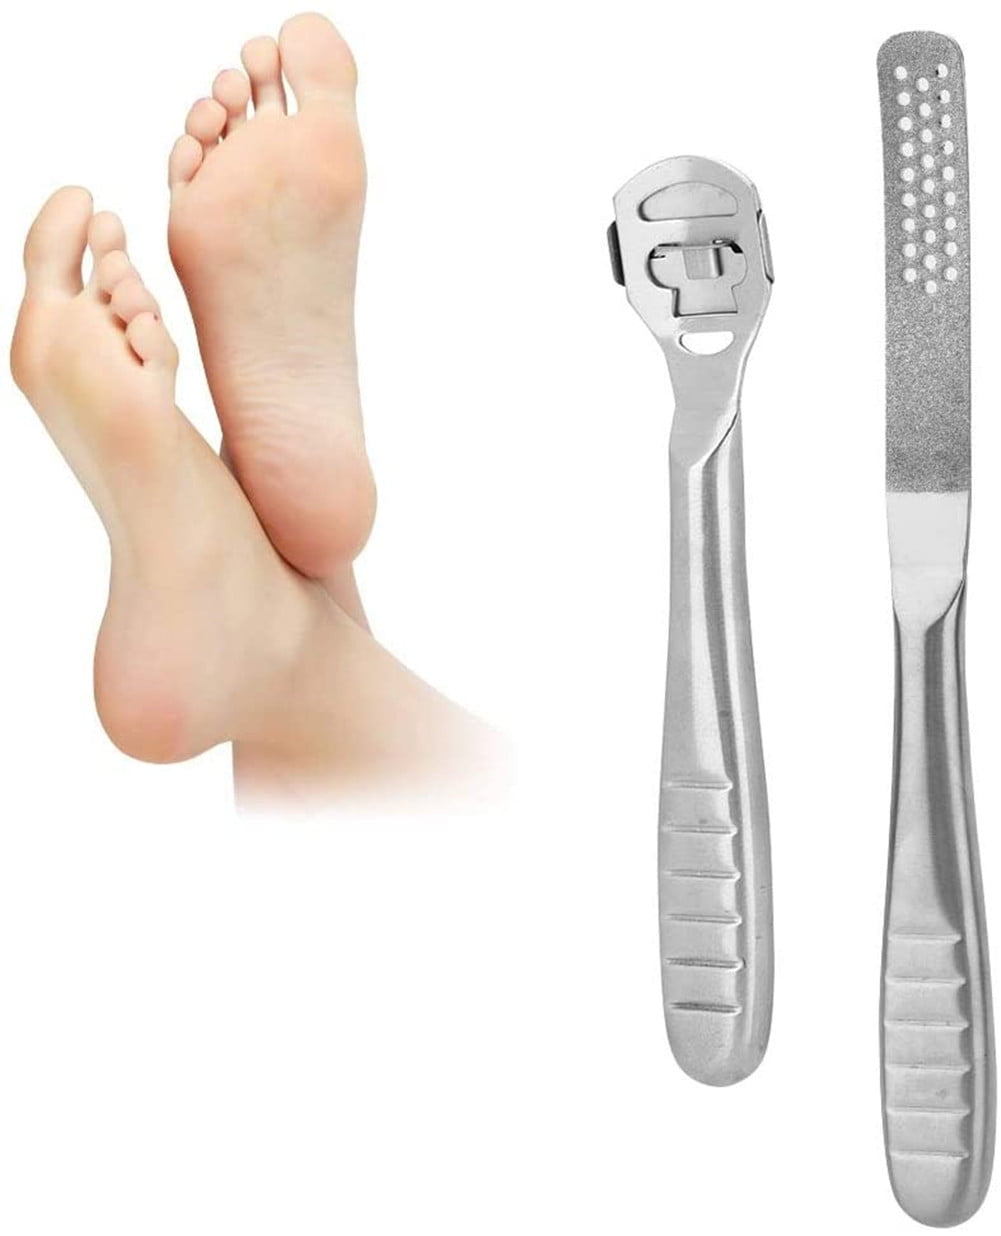 Foot Rasp Foot File and Callus Remover, Foot Care Pedicure Metal Surface  Tool To Remove Hard Skin, Can be Used on Both Wet and Dry feet, Surgical  grade Stainless Steel File with